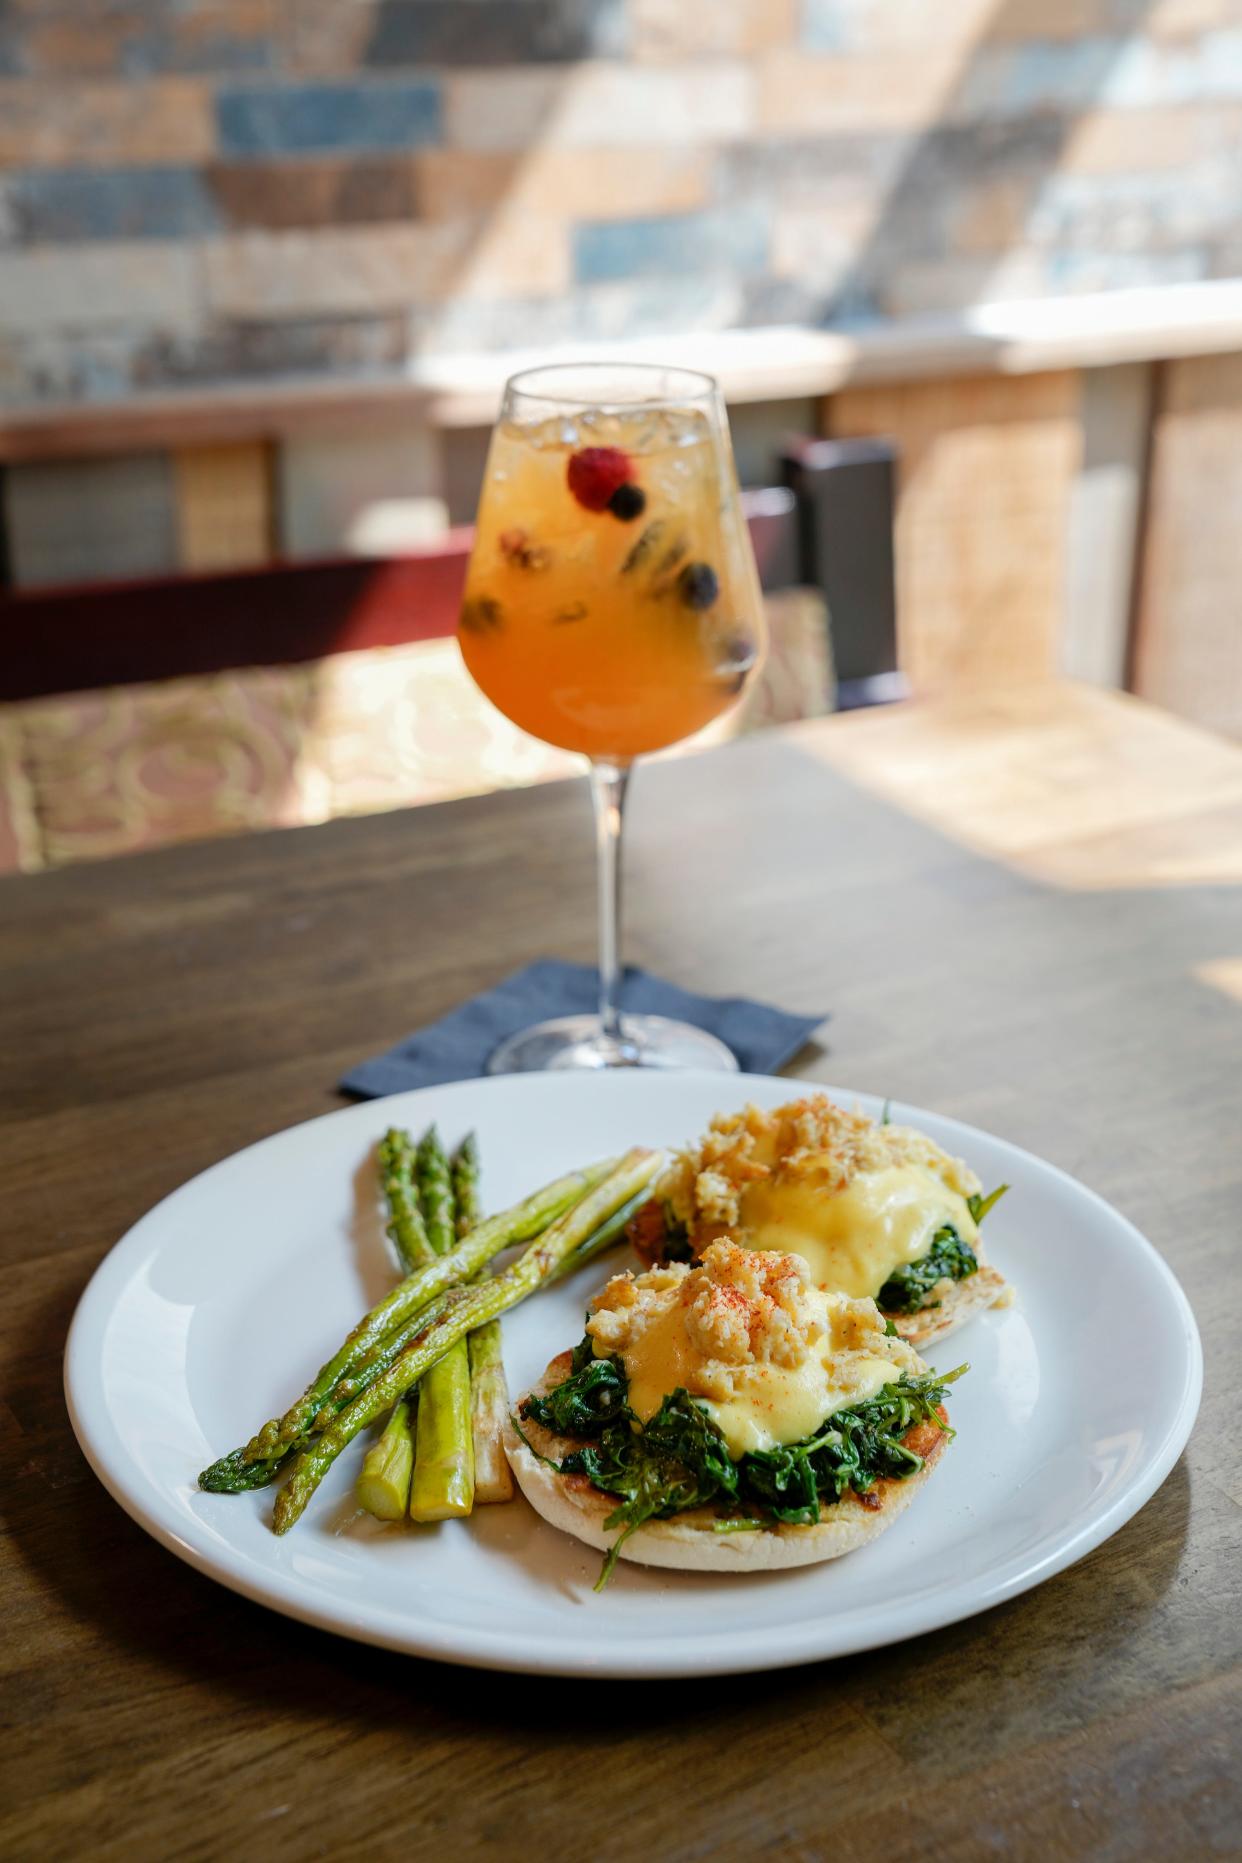 Crab Benedict, featuring blue crab and poached eggs on a bed of spinach, served atop an English muffin and accompanied by sangria at Fado Pub & Kitchen in Dublin's Bridge Park.